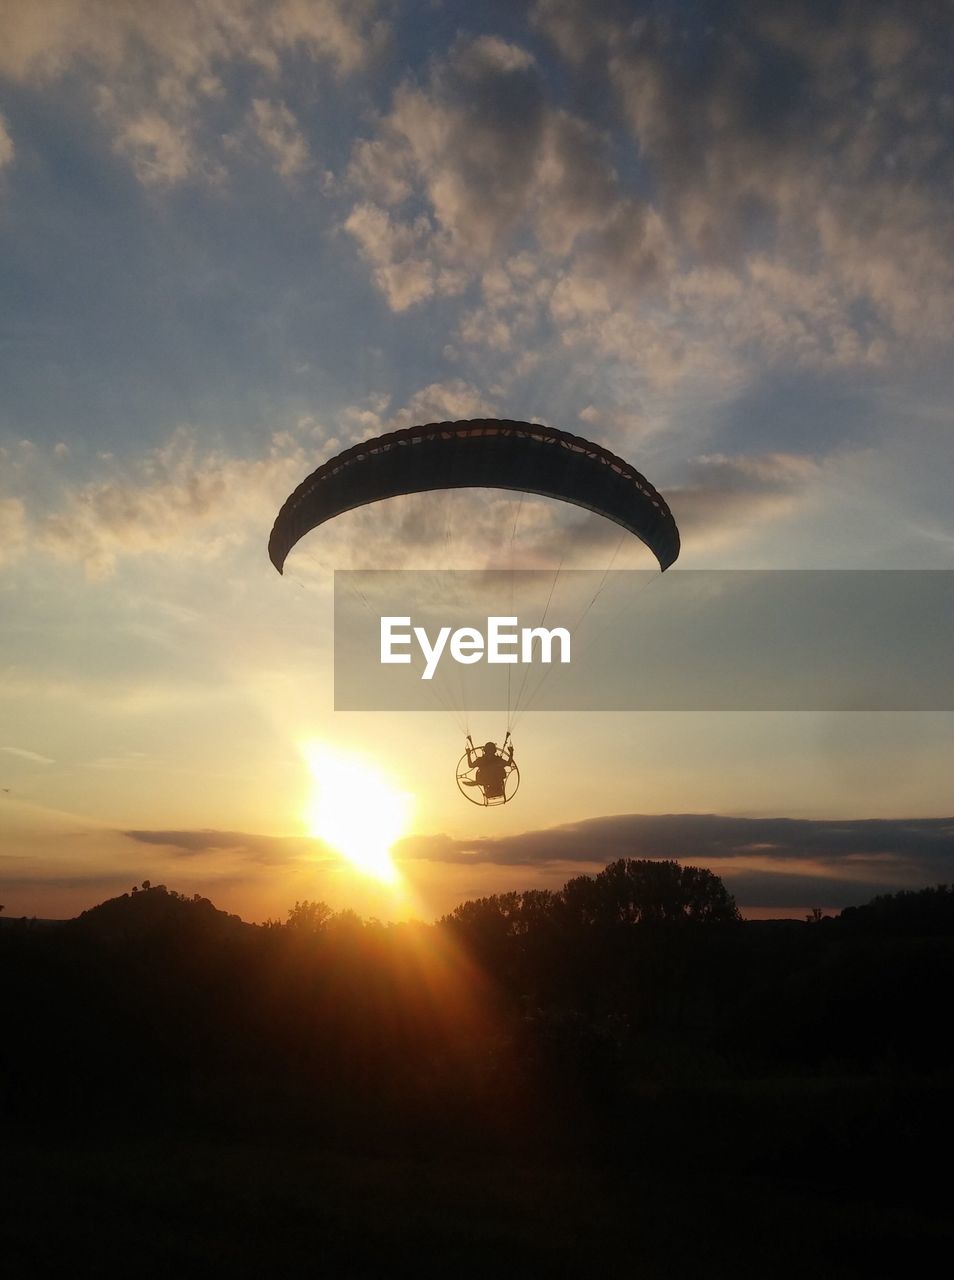 Silhouette person powered paragliding against sky during sunset